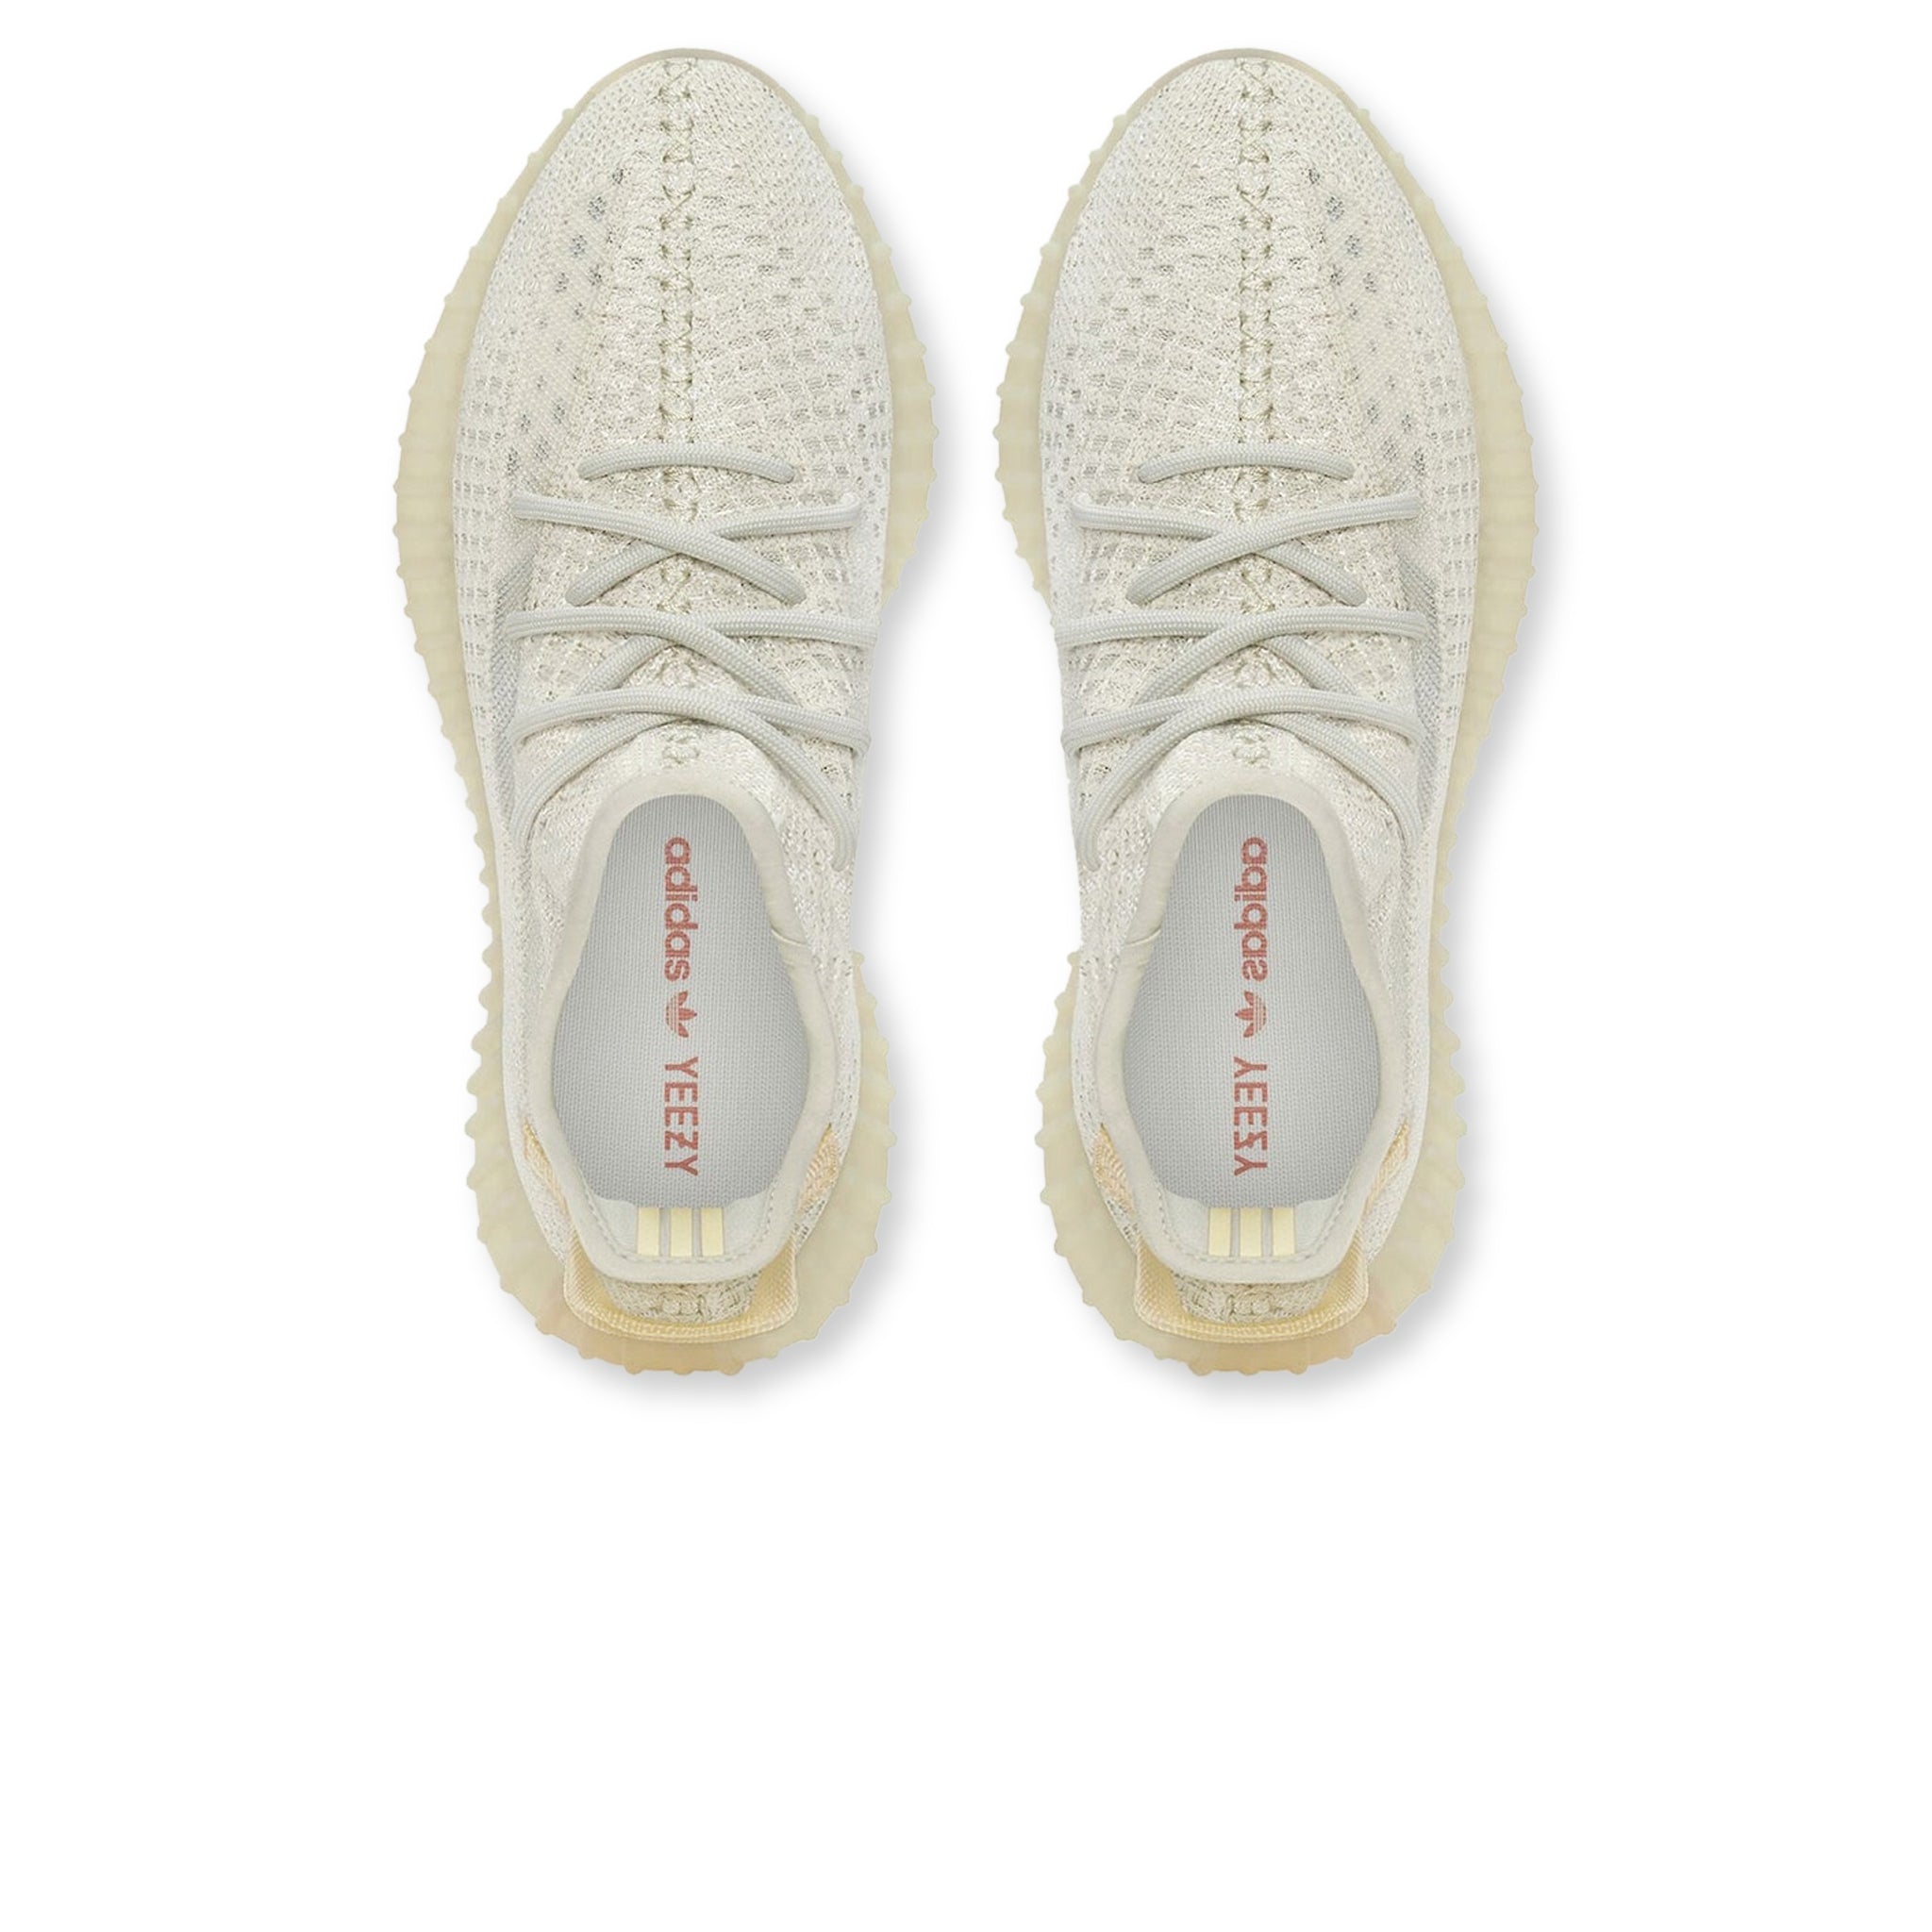 Top down view of Adidas Yeezy Boost 350 V2 Light GY3438